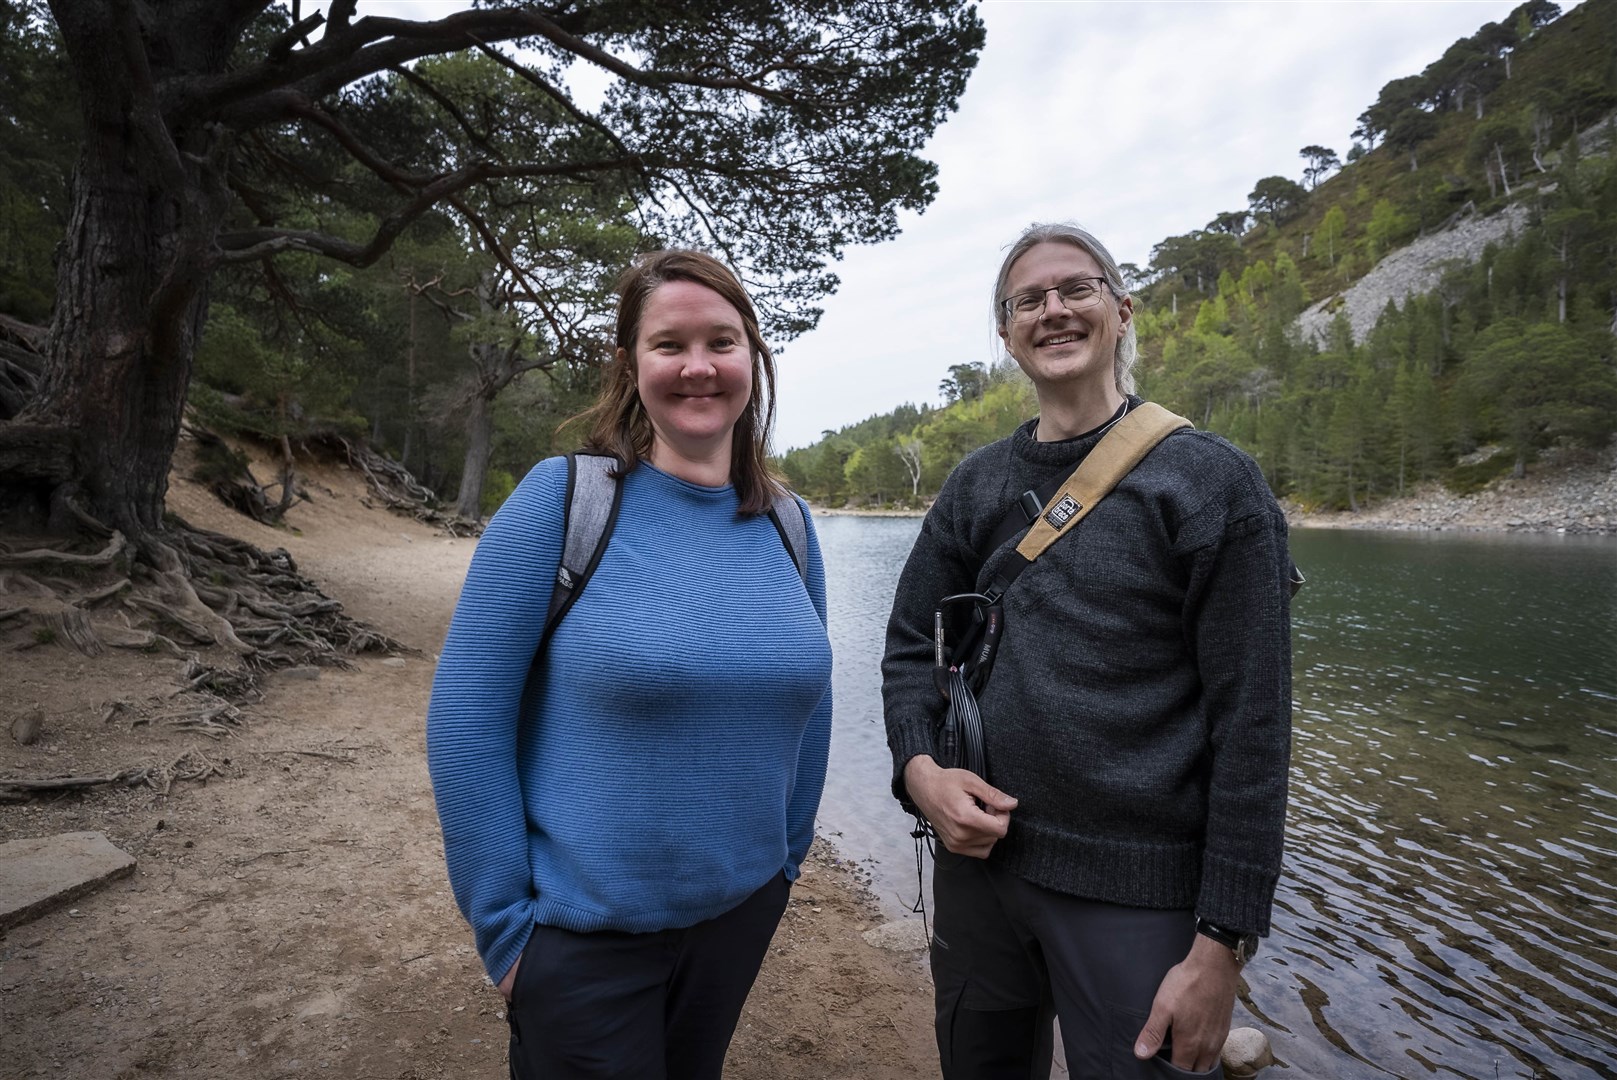 BBC ALBA follows creative duo Mhairi Hall and David de la Haye on a fascinating artistic journey as they join forces to explore the underwater world of the Cairngorms in Ceòl Lochan a’ Mhonaidh Ruaidh | Underwater Cairngorms.